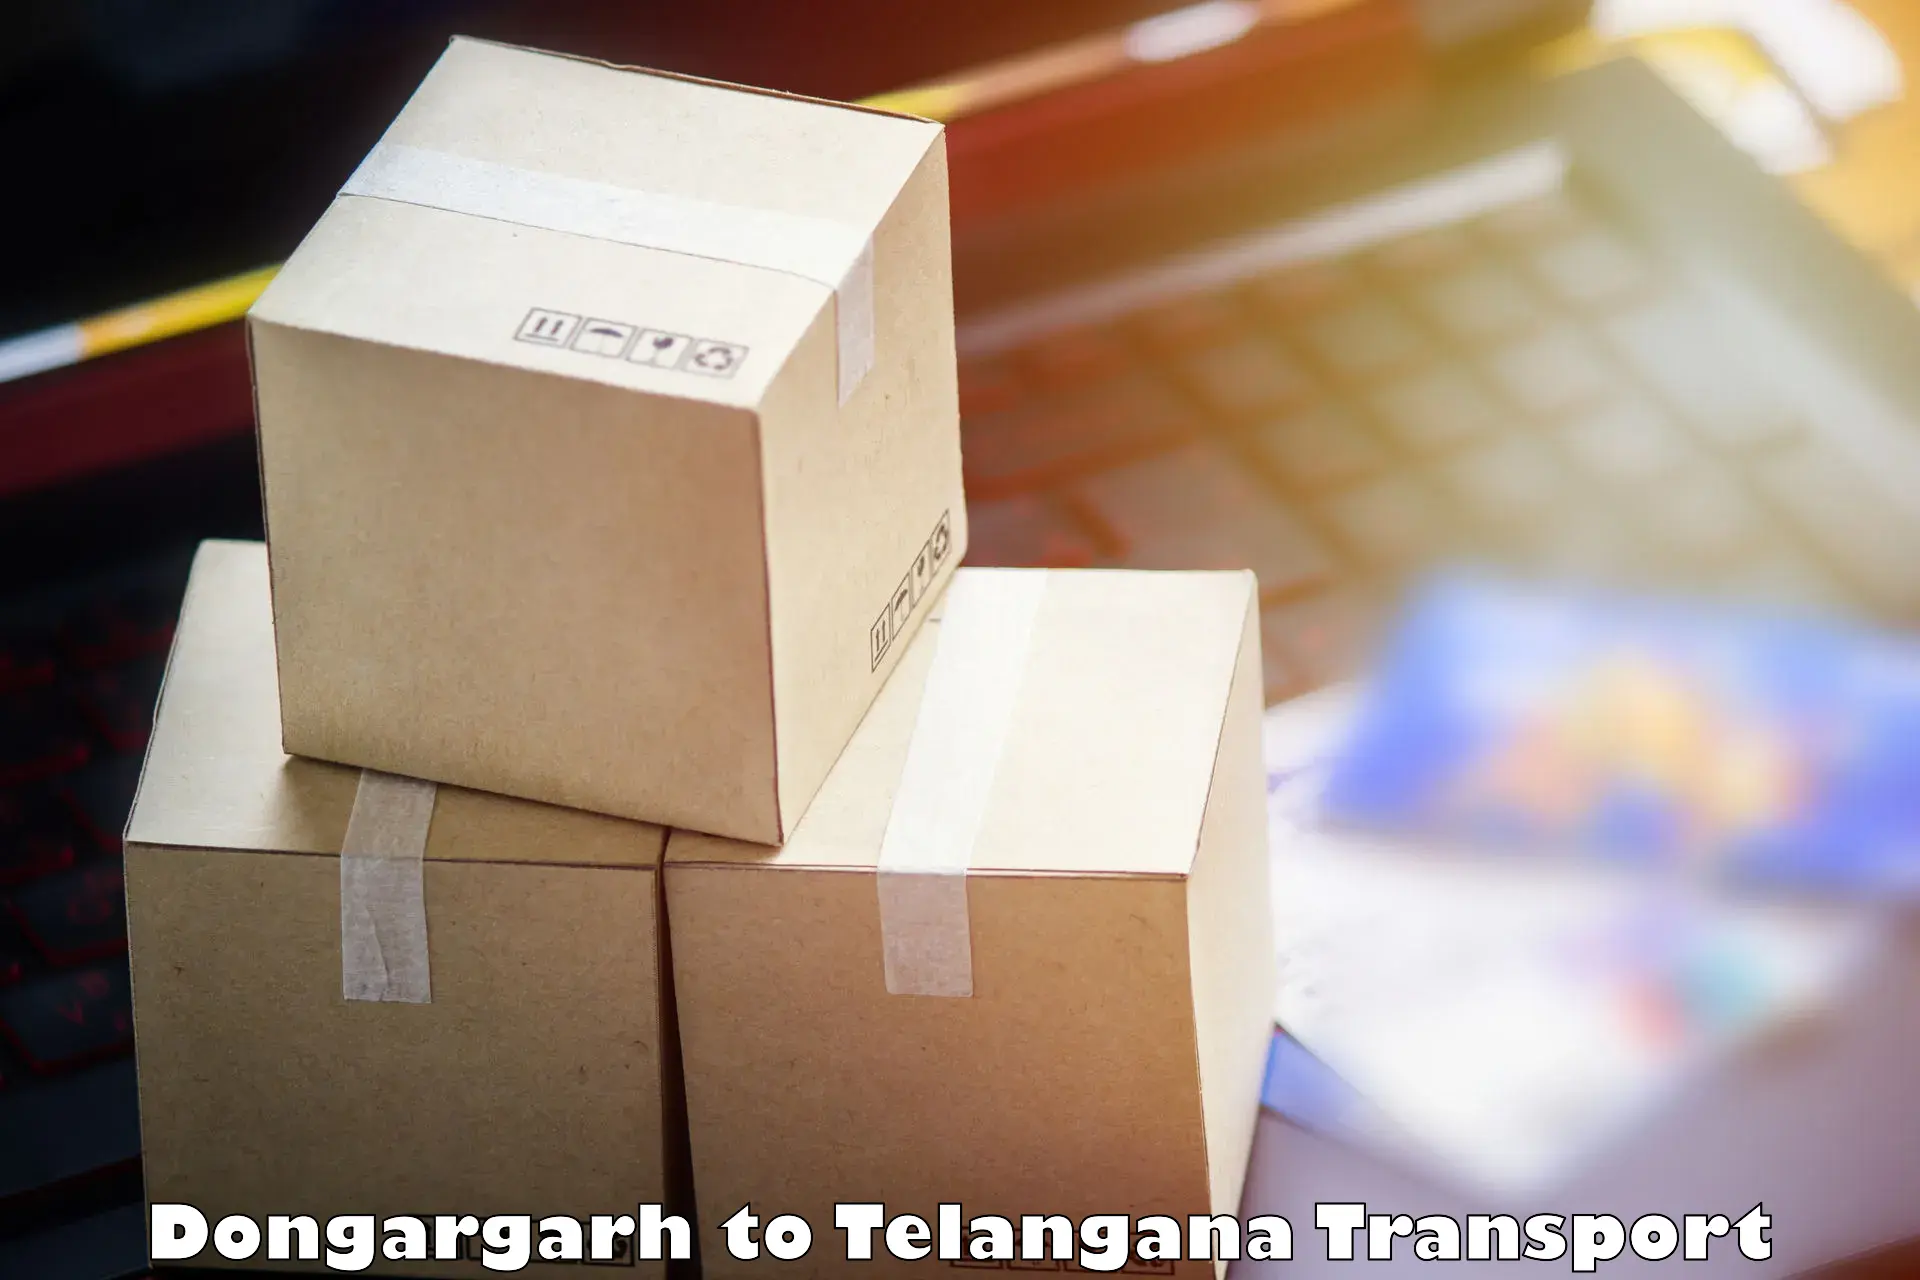 Truck transport companies in India in Dongargarh to Manneguda